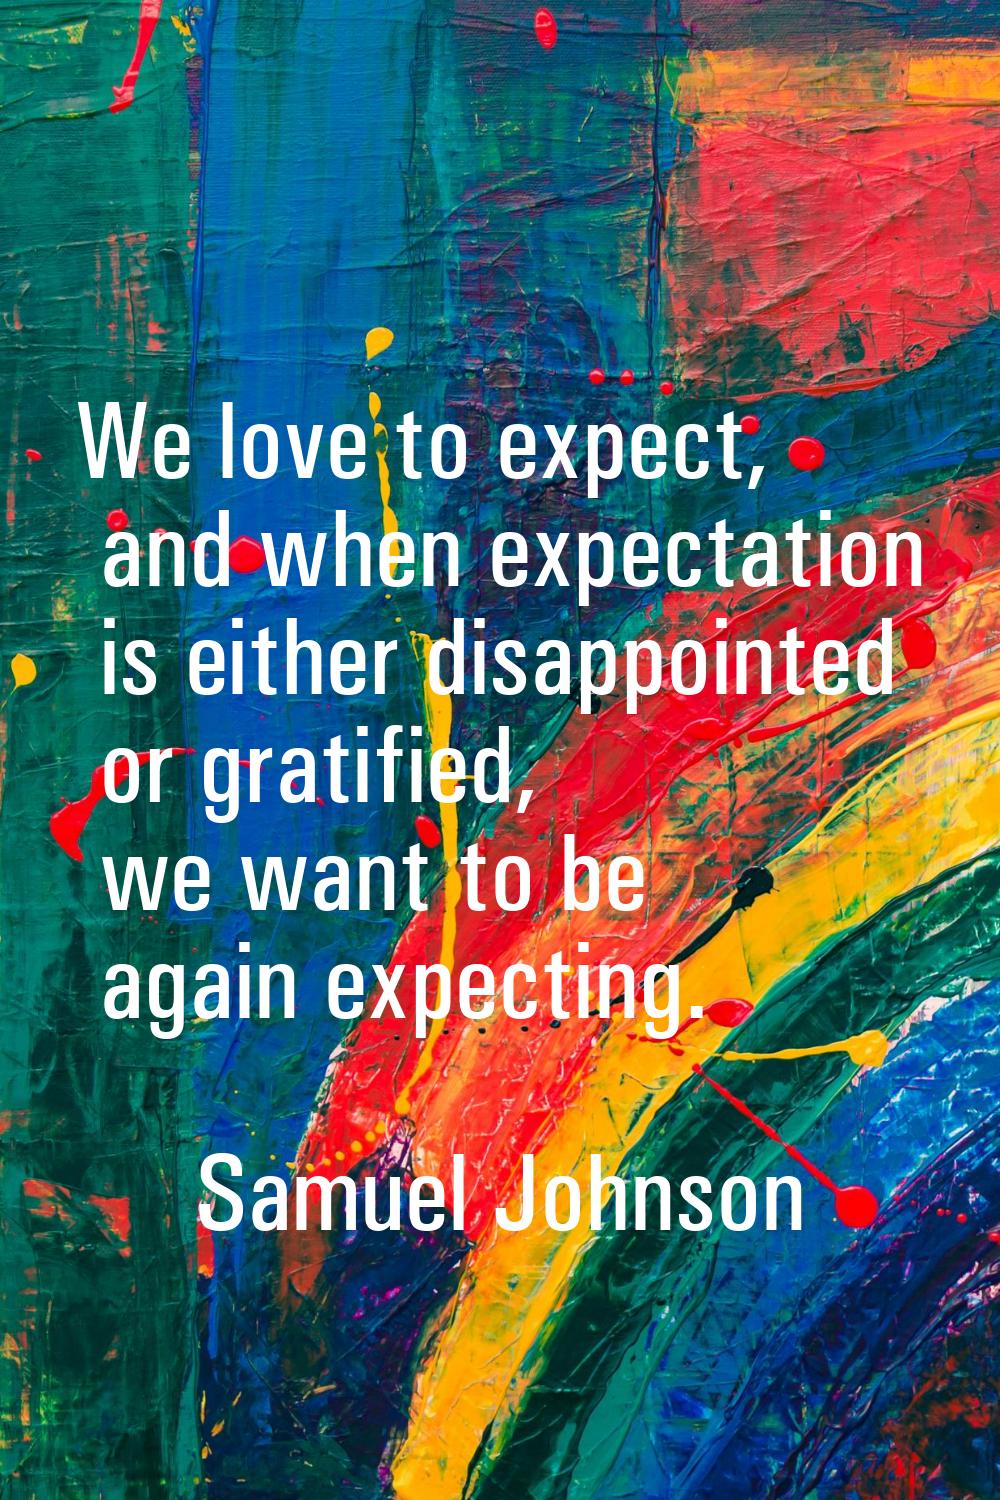 We love to expect, and when expectation is either disappointed or gratified, we want to be again ex